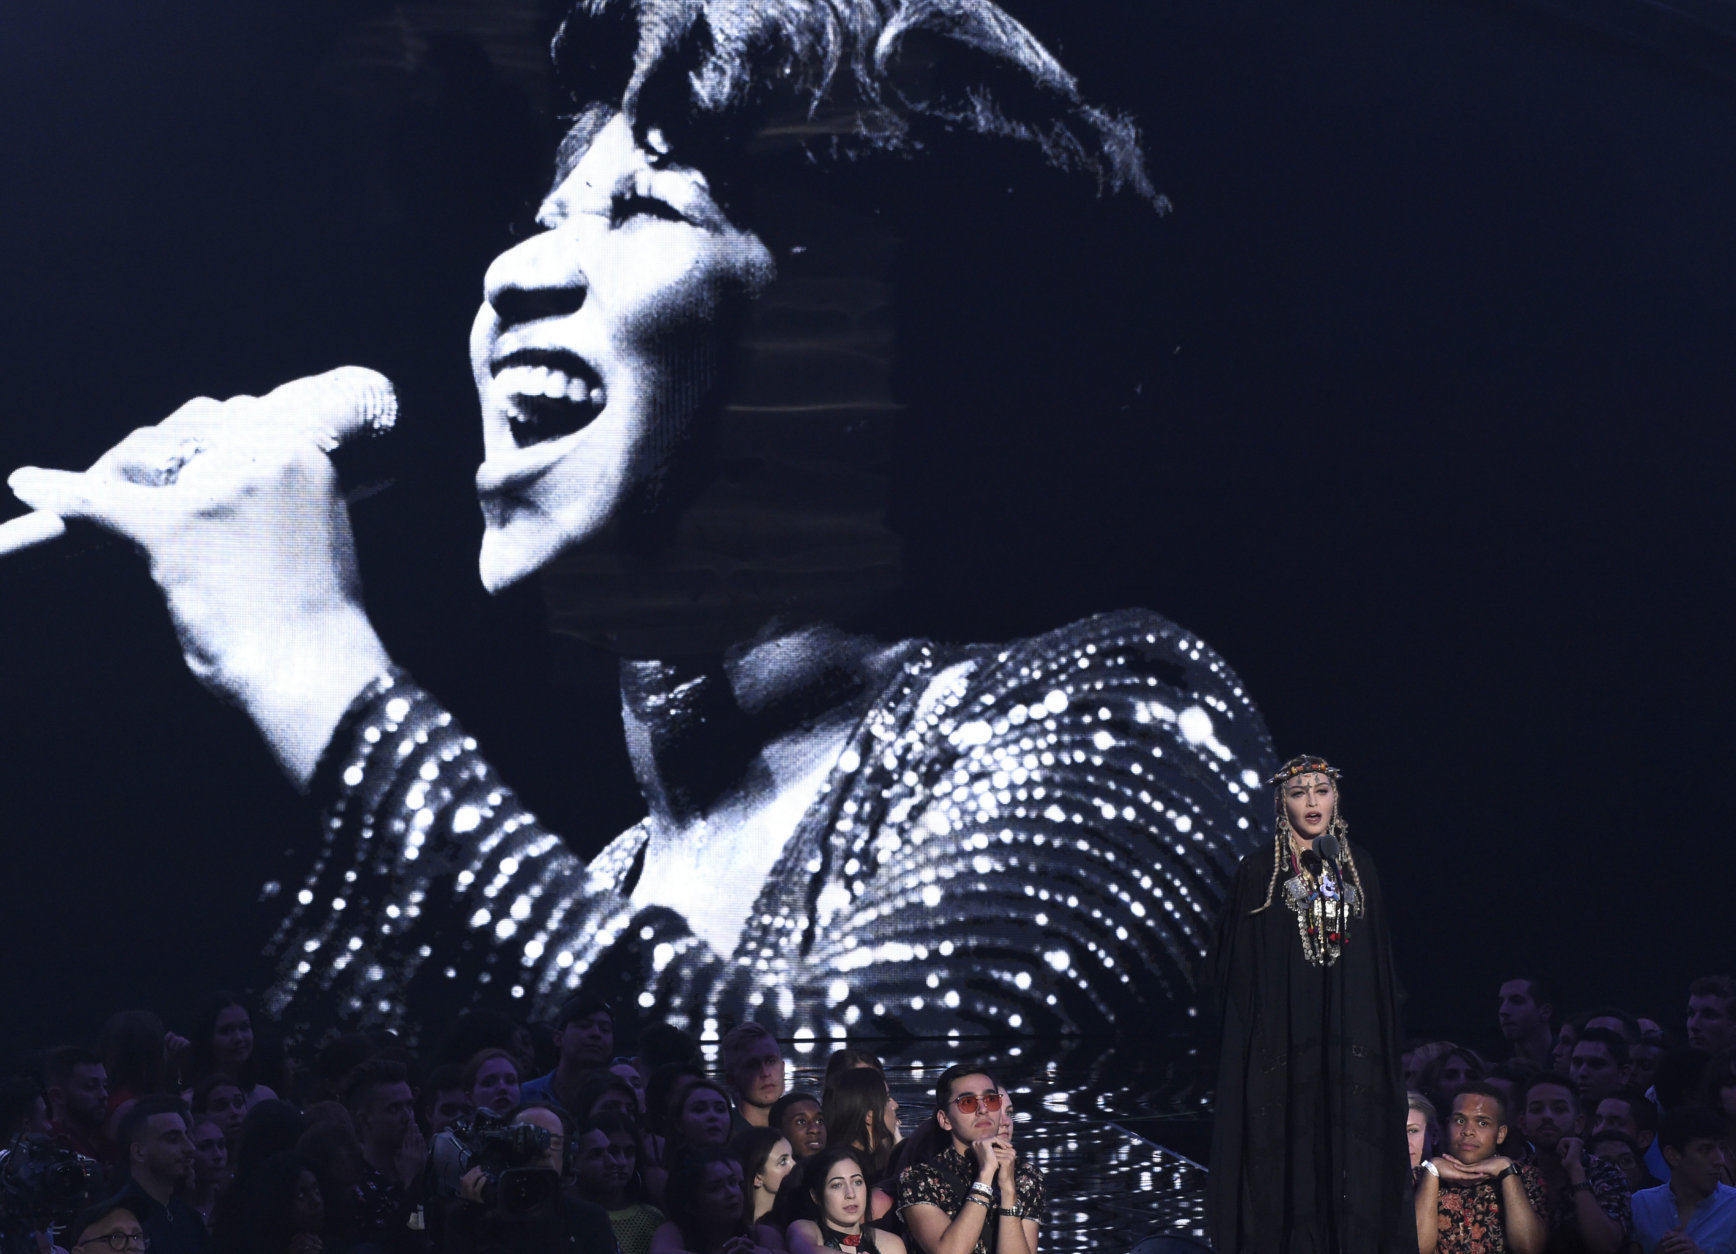 Madonna presents a tribute to Aretha Franklin, pictured on screen, at the MTV Video Music Awards at Radio City Music Hall on Monday, Aug. 20, 2018, in New York. (Photo by Chris Pizzello/Invision/AP)